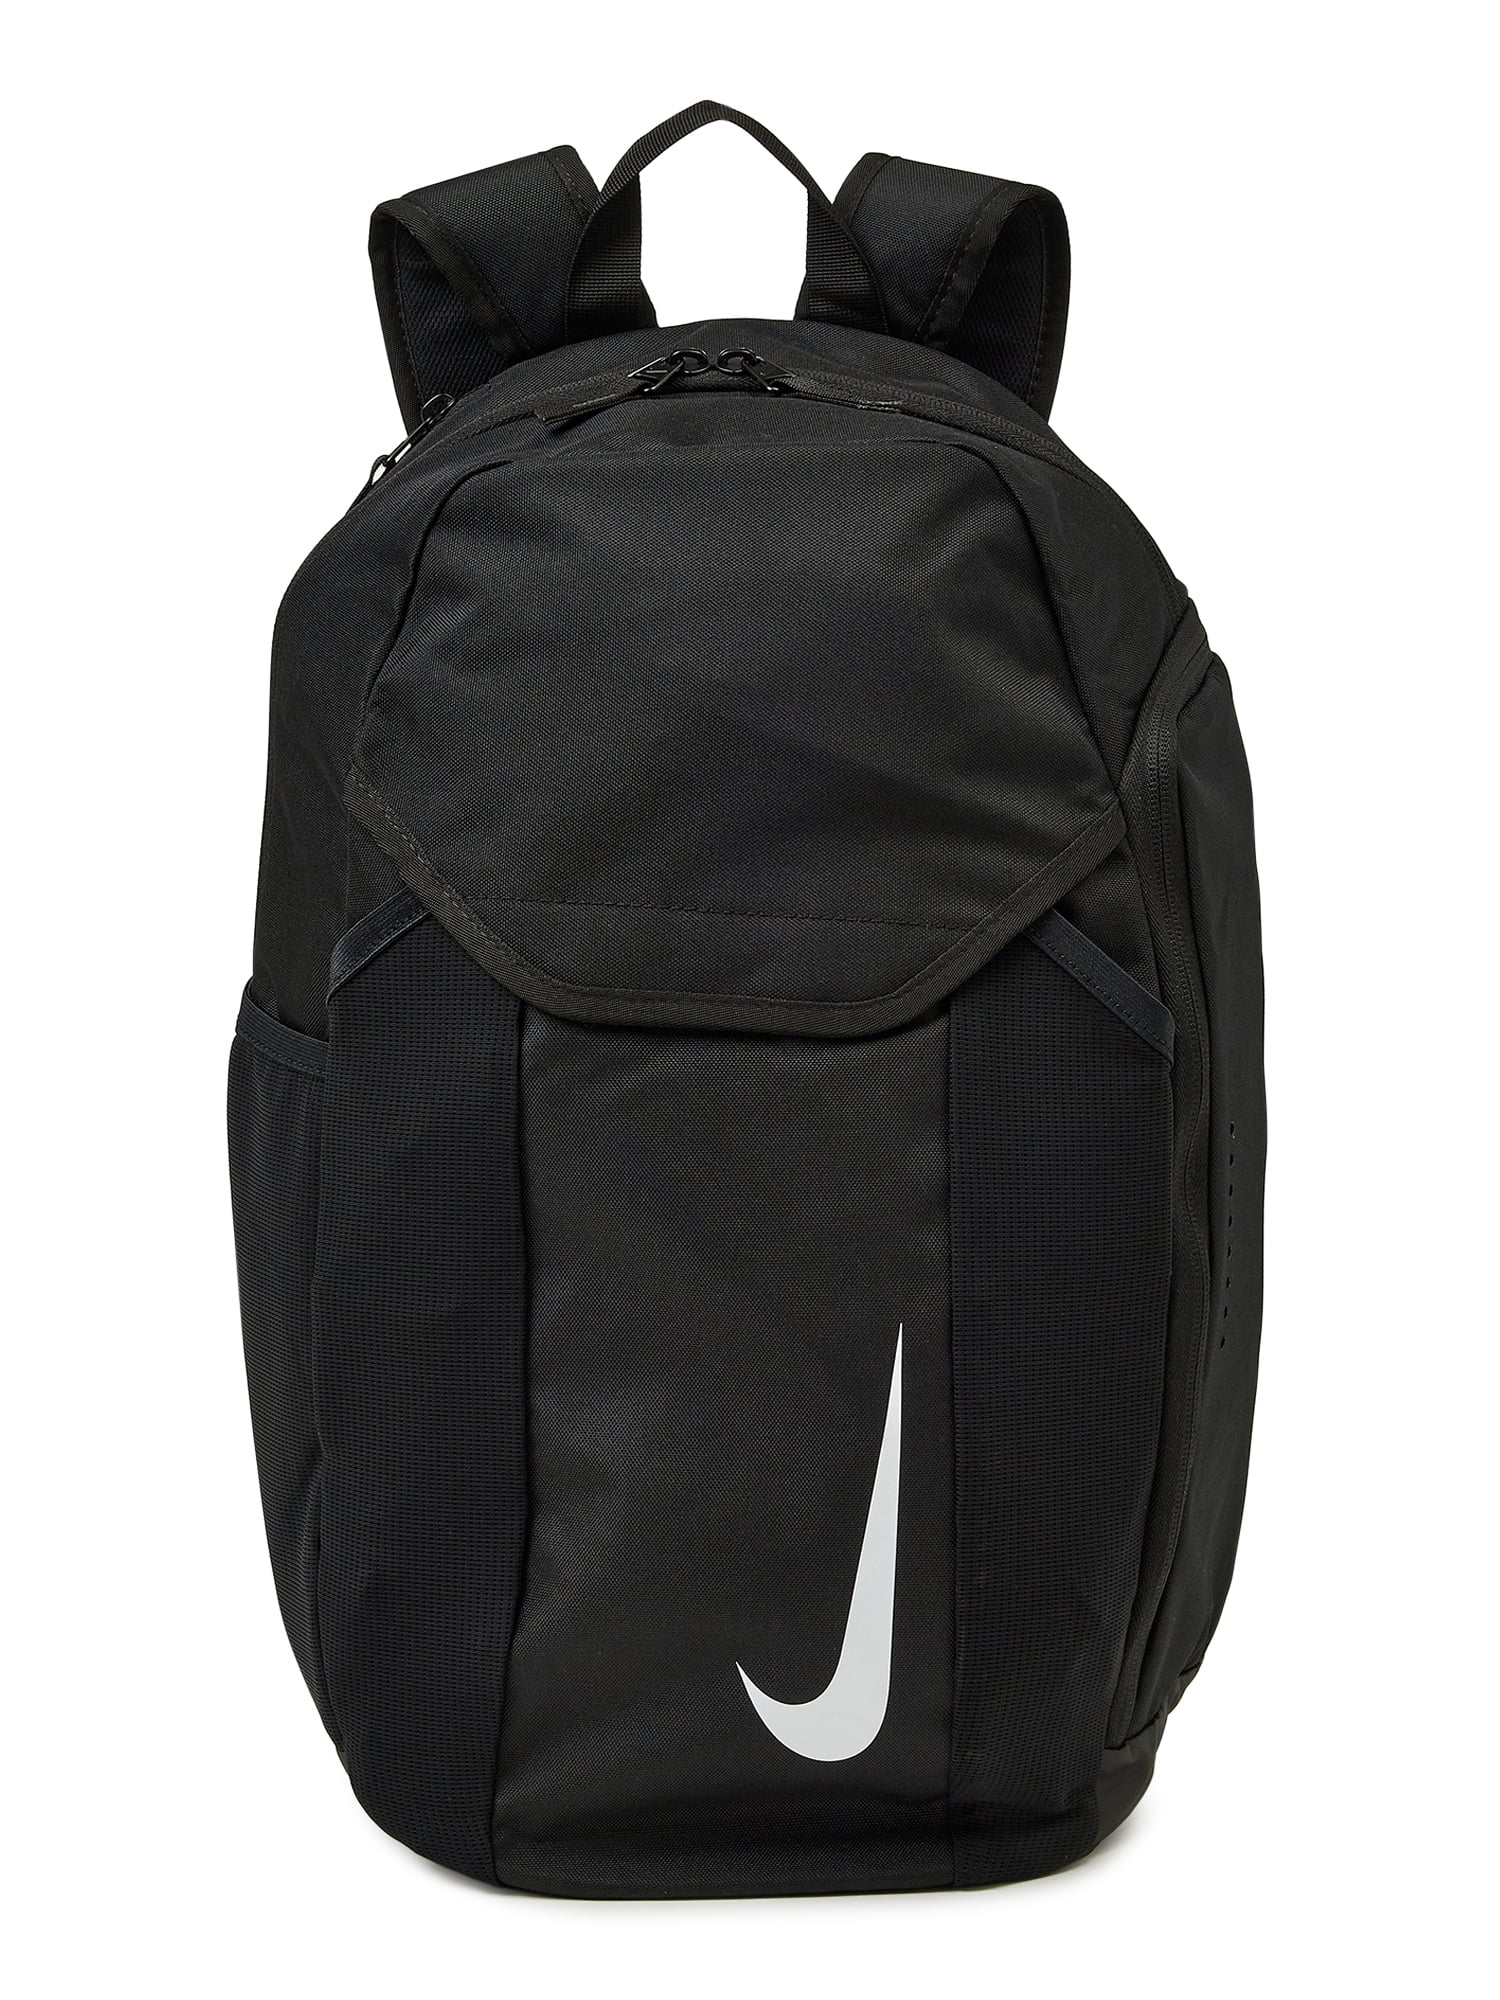 Academy Sports + Outdoors Clear Backpack